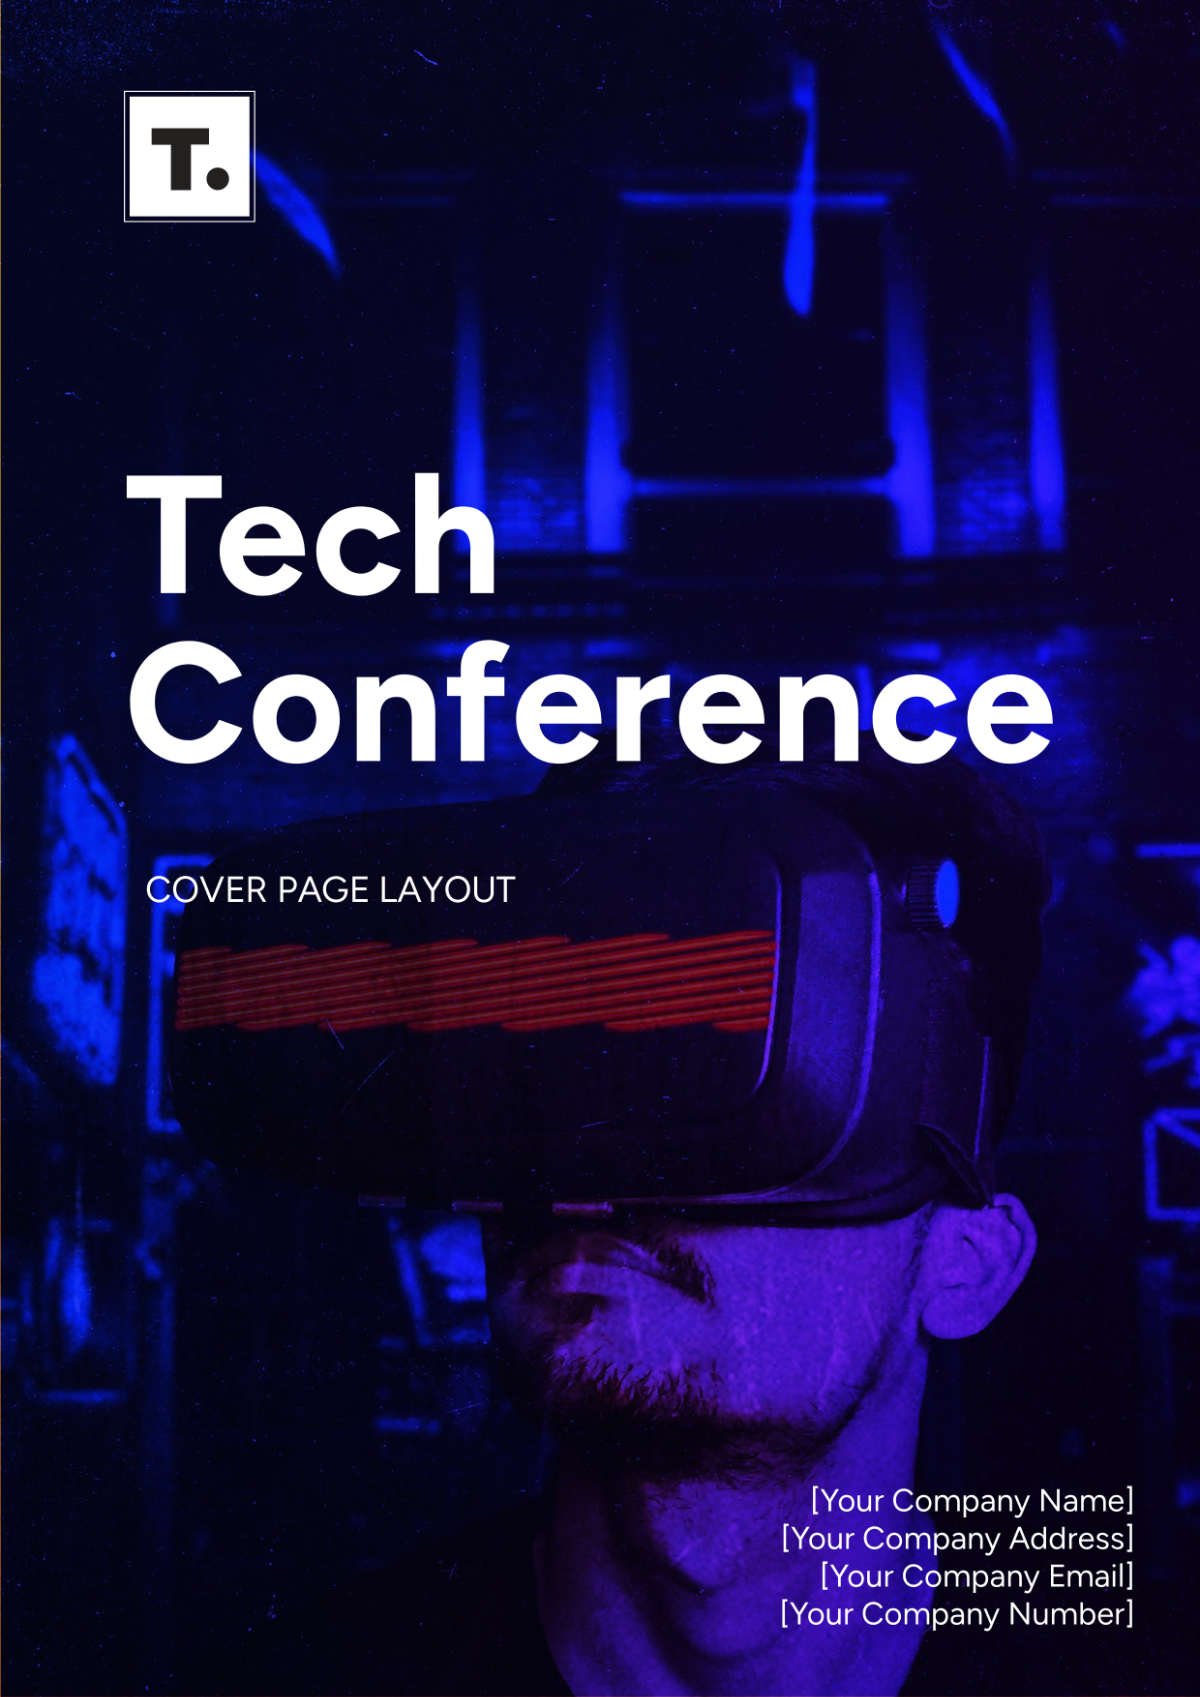 Tech Conference Cover Page Layout